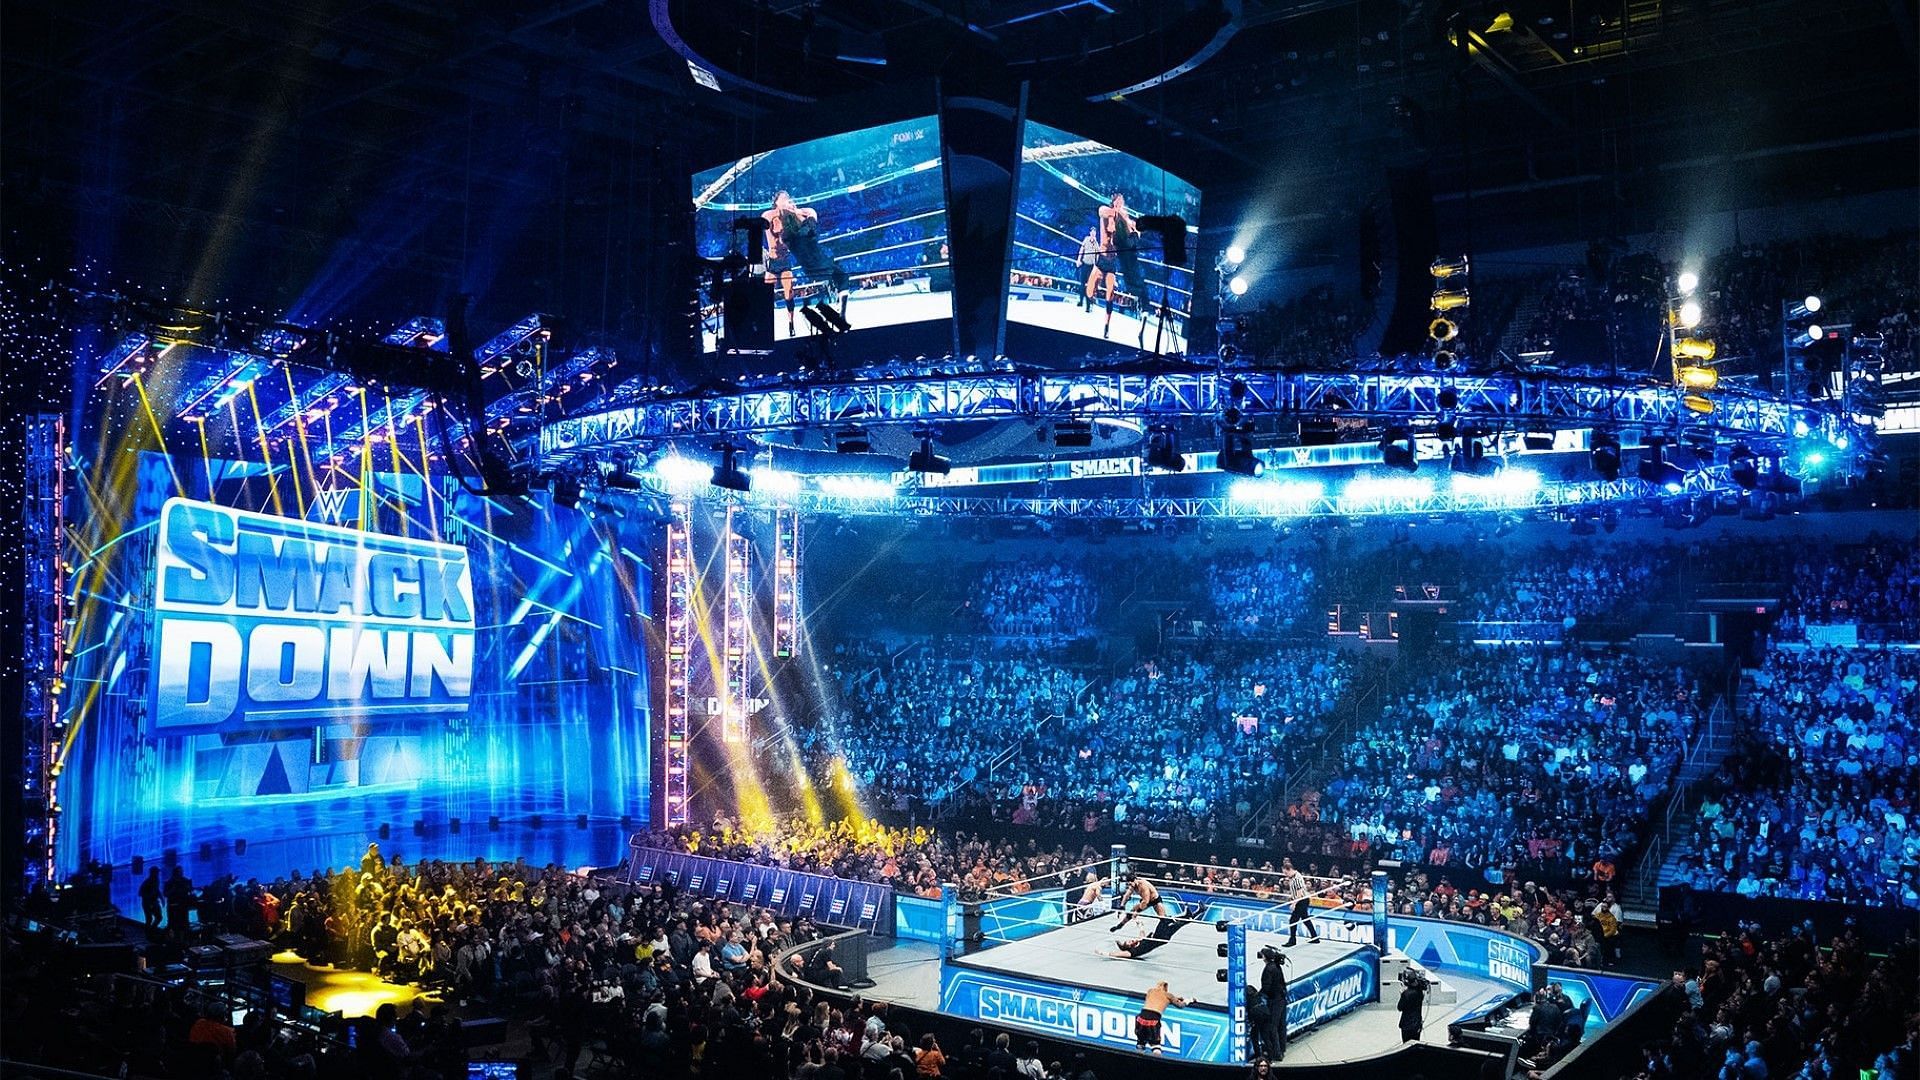 The WWE SmackDown ring and stage/set inside arena